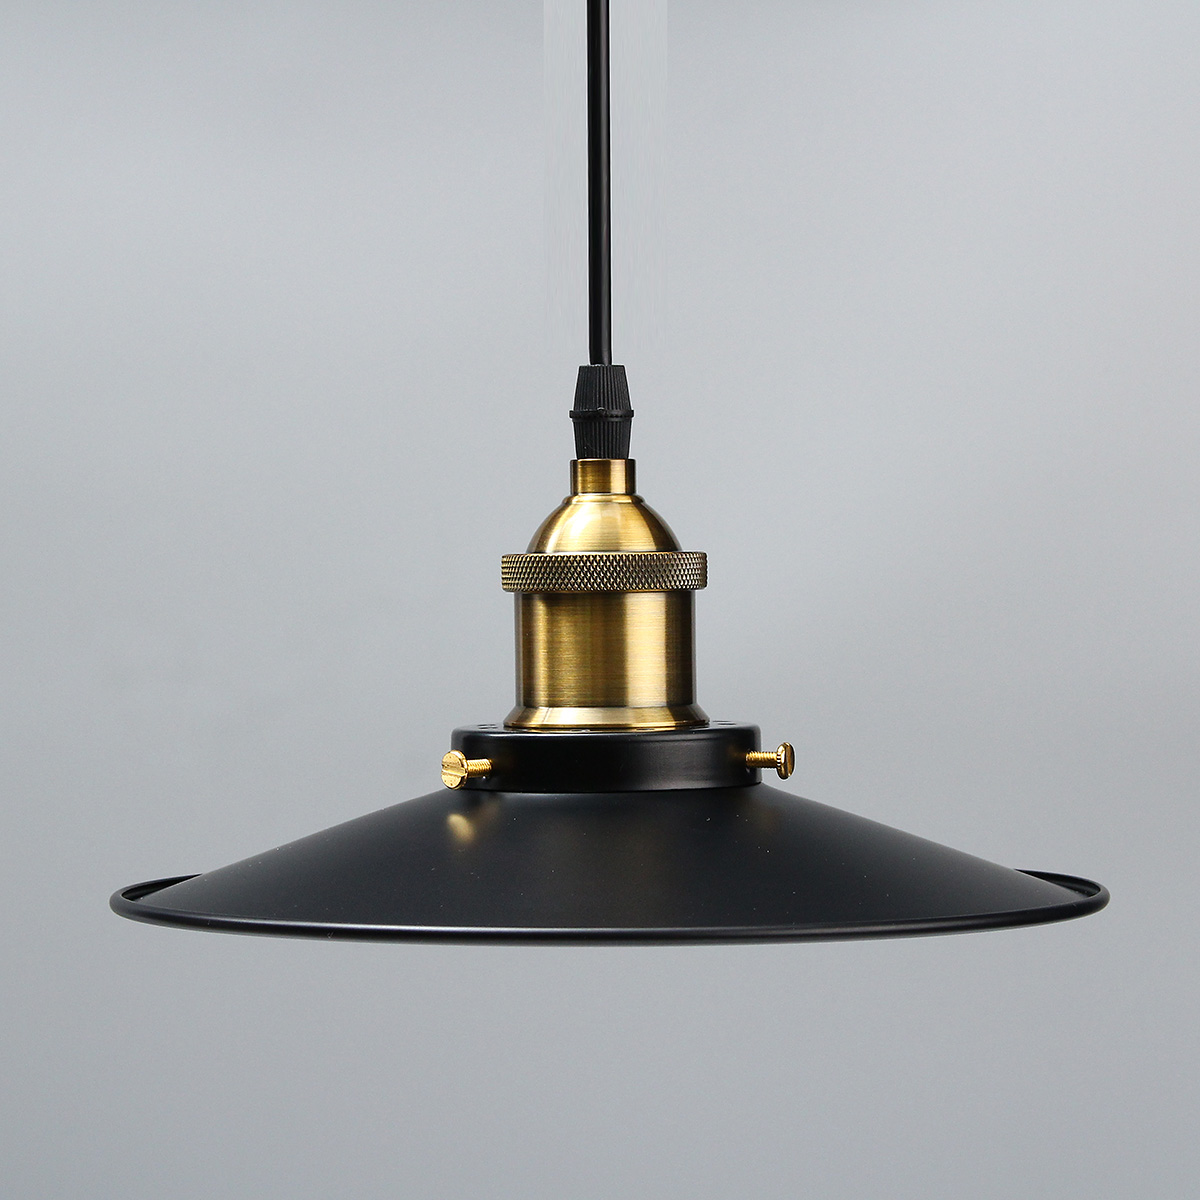 Find E27 Industrial Retro Vintage Iron Triangle/Round Plate Ceiling Lamp Pendant Light Chandelier Fixture for Sale on Gipsybee.com with cryptocurrencies